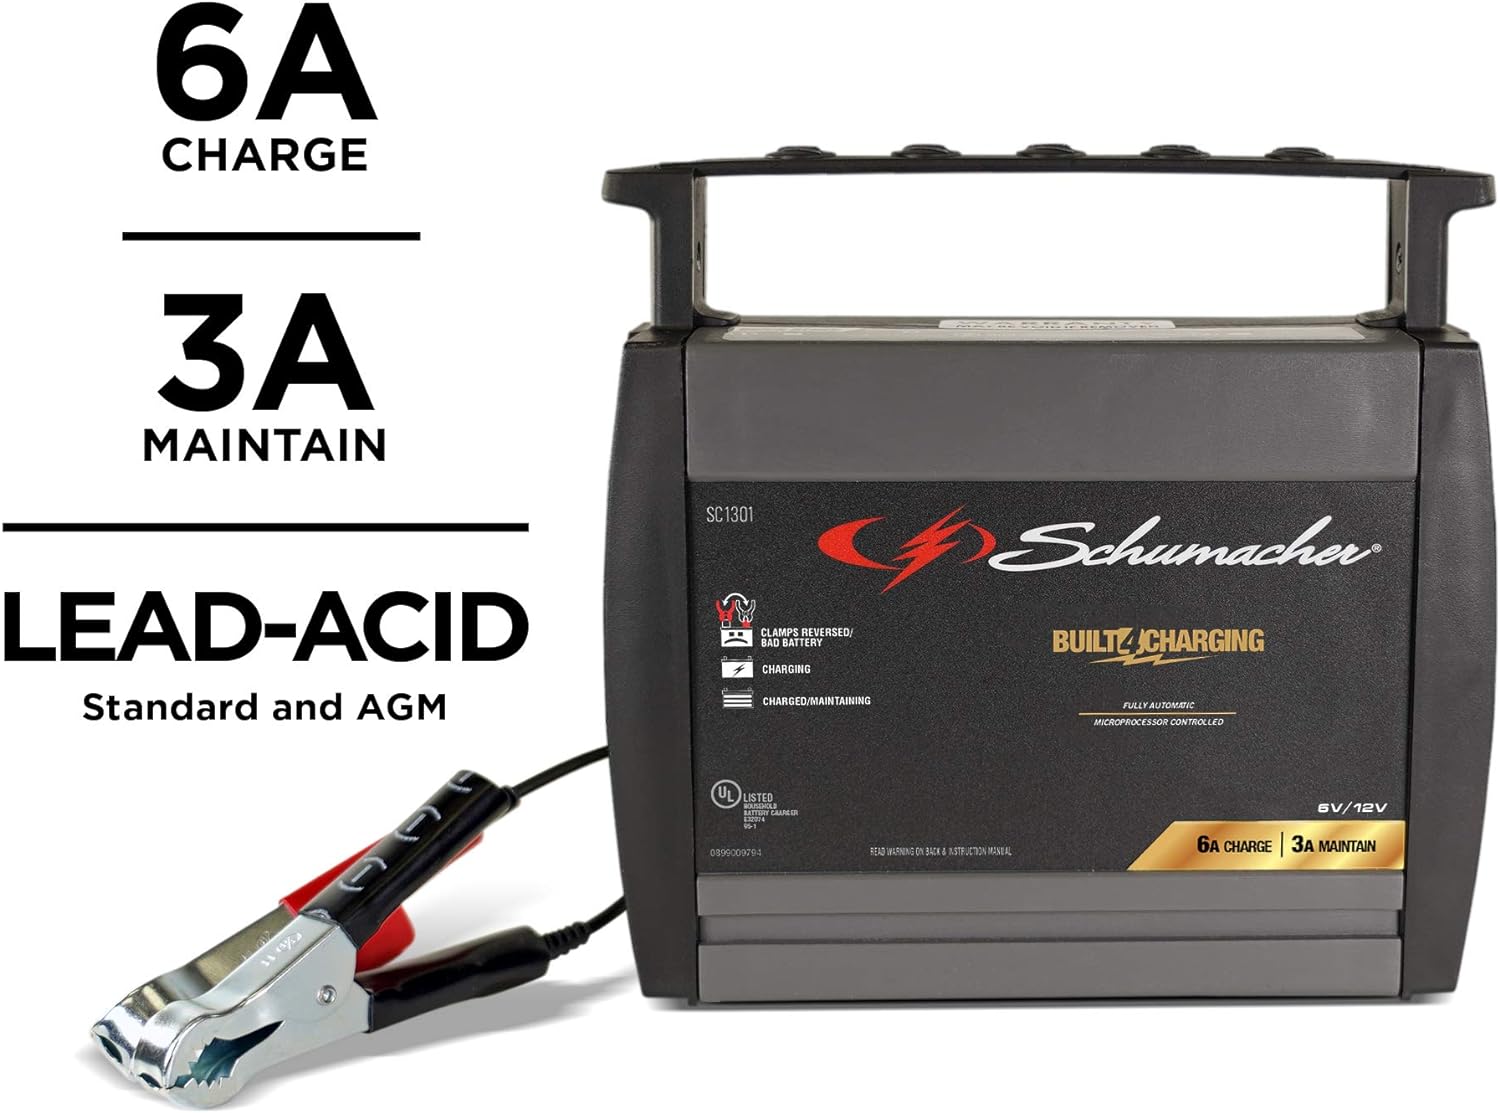 Schumacher SC1304 Fully Automatic Battery Charger Maintainer, and Auto Desulfator with Battery Detection - 15 Amp/3 Amp, 6V/12V - For Cars, Trucks, SUVs, Marine, RV Batteries - Schumacher SC1304 Battery Charger Review